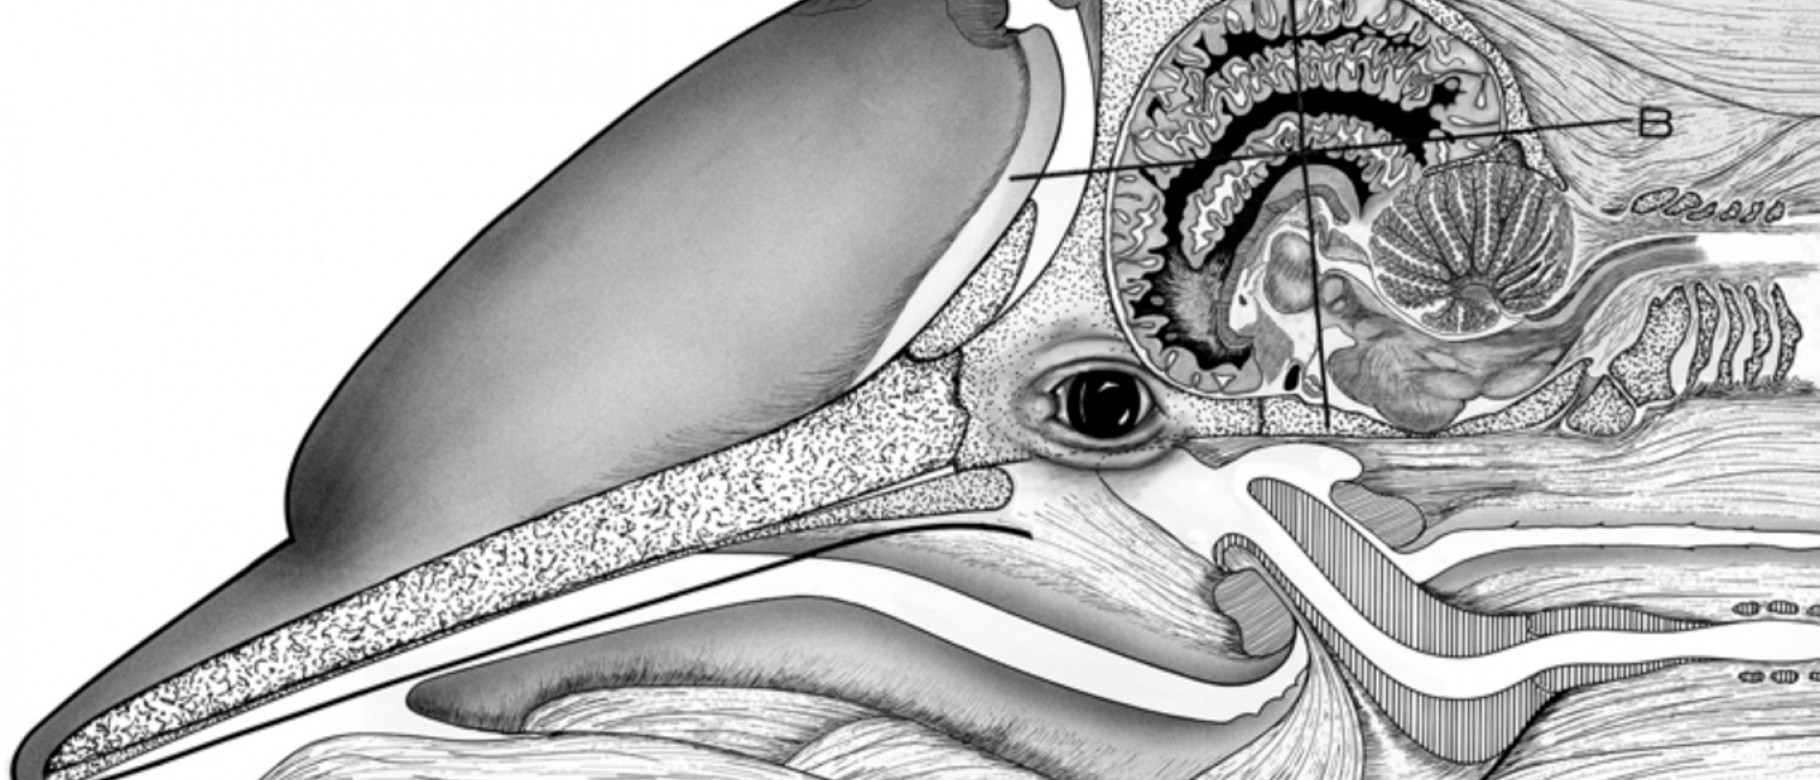 Brain of bottlenose dolphin in situ showing planes of serial section used. From: The Anatomy of the Brain of the Bottlenose Dolp